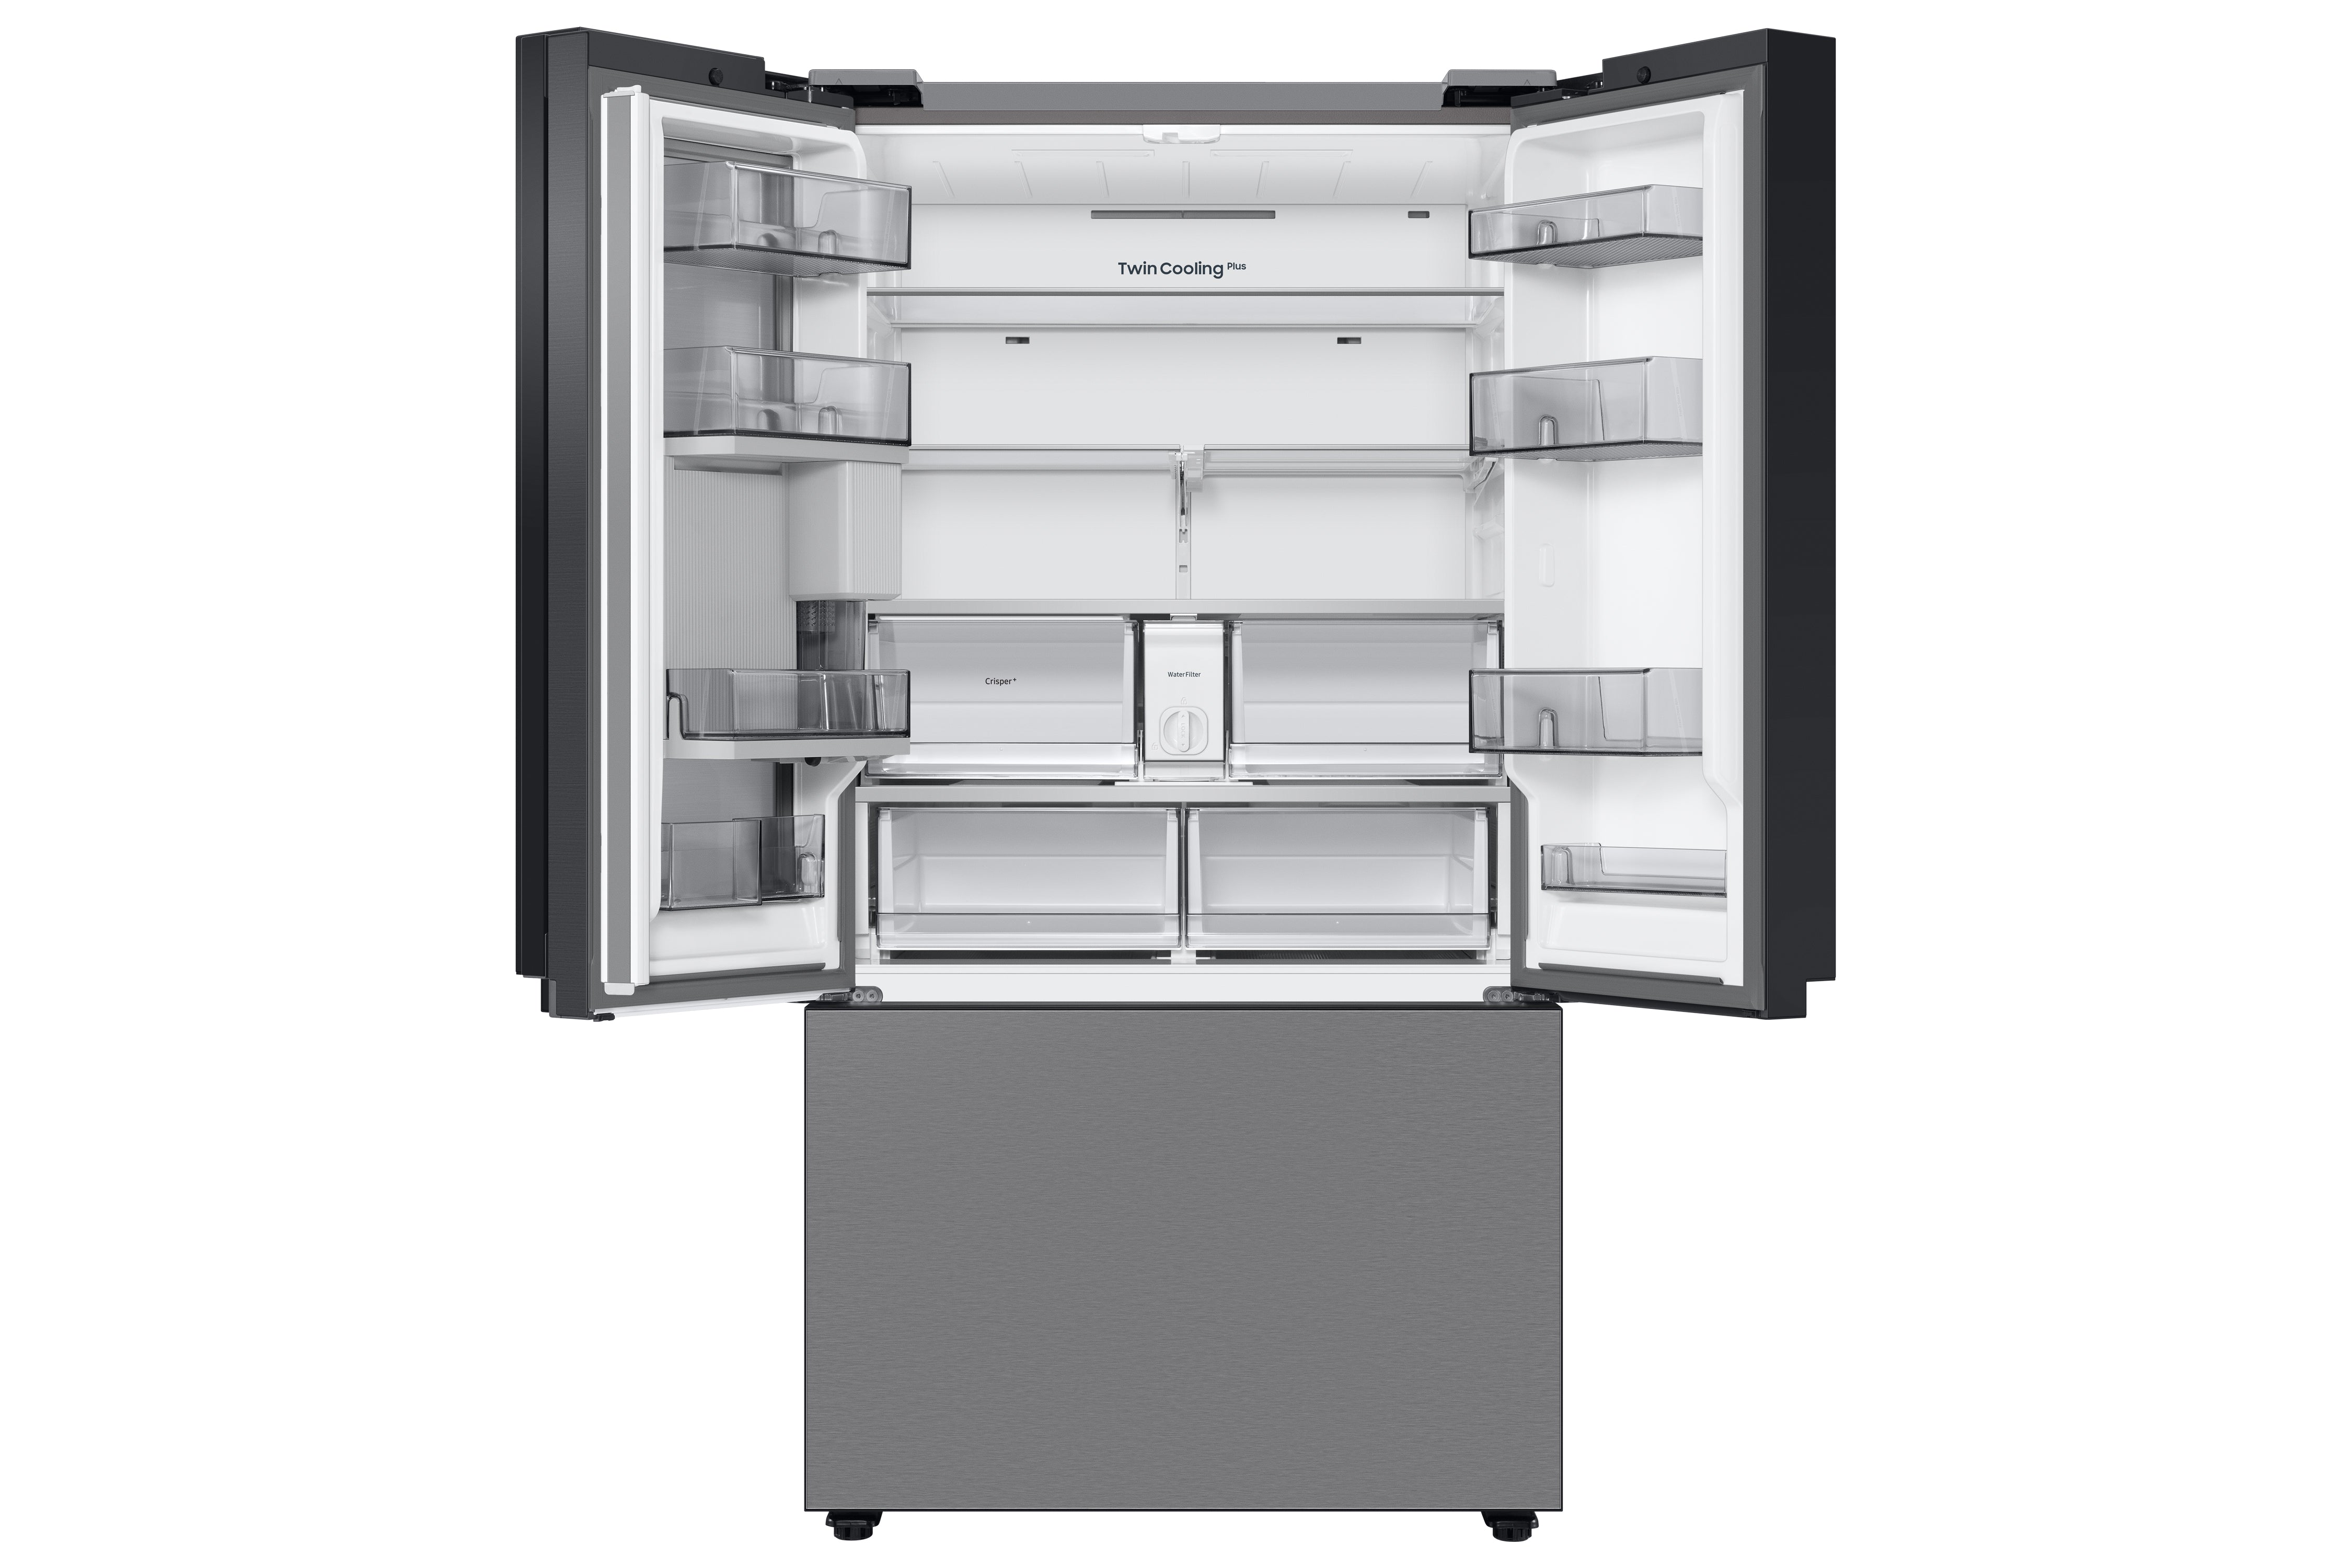 Samsung - Bespoke 35.8 Inch 30.1 cu. ft French Door Refrigerator in Stainless - RF30BB6600QLAA